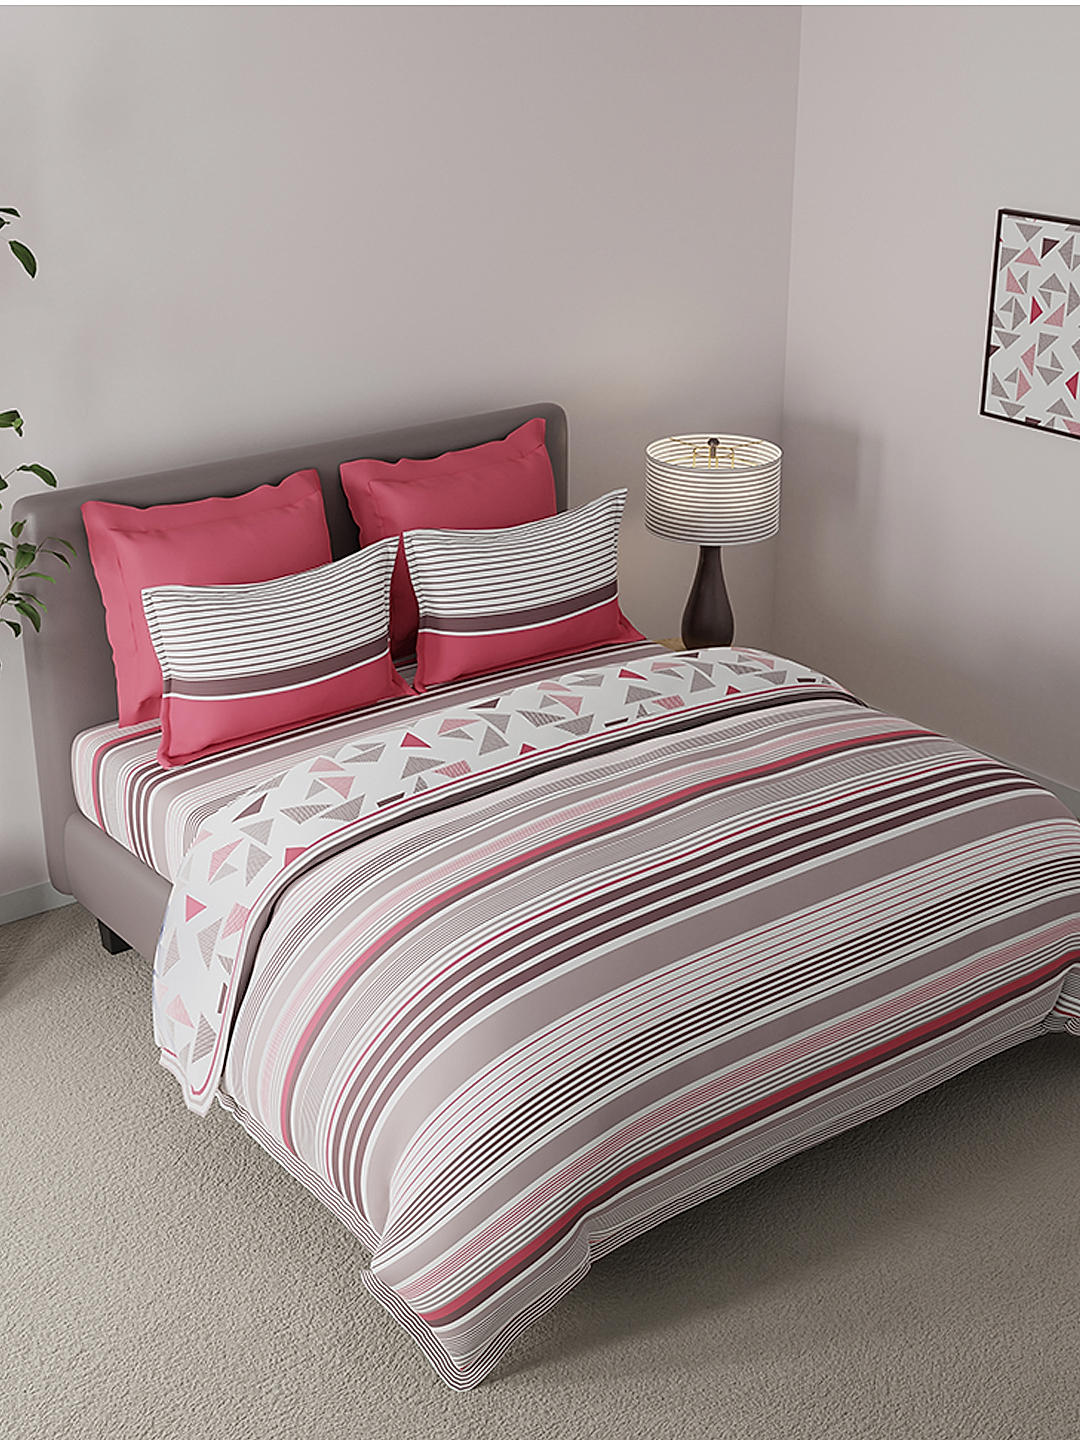 Erica Cotton Value Multi Colored Stripes Print Double Cordinated Bedding set with Bedsheet, Pillow Cover & Comforter